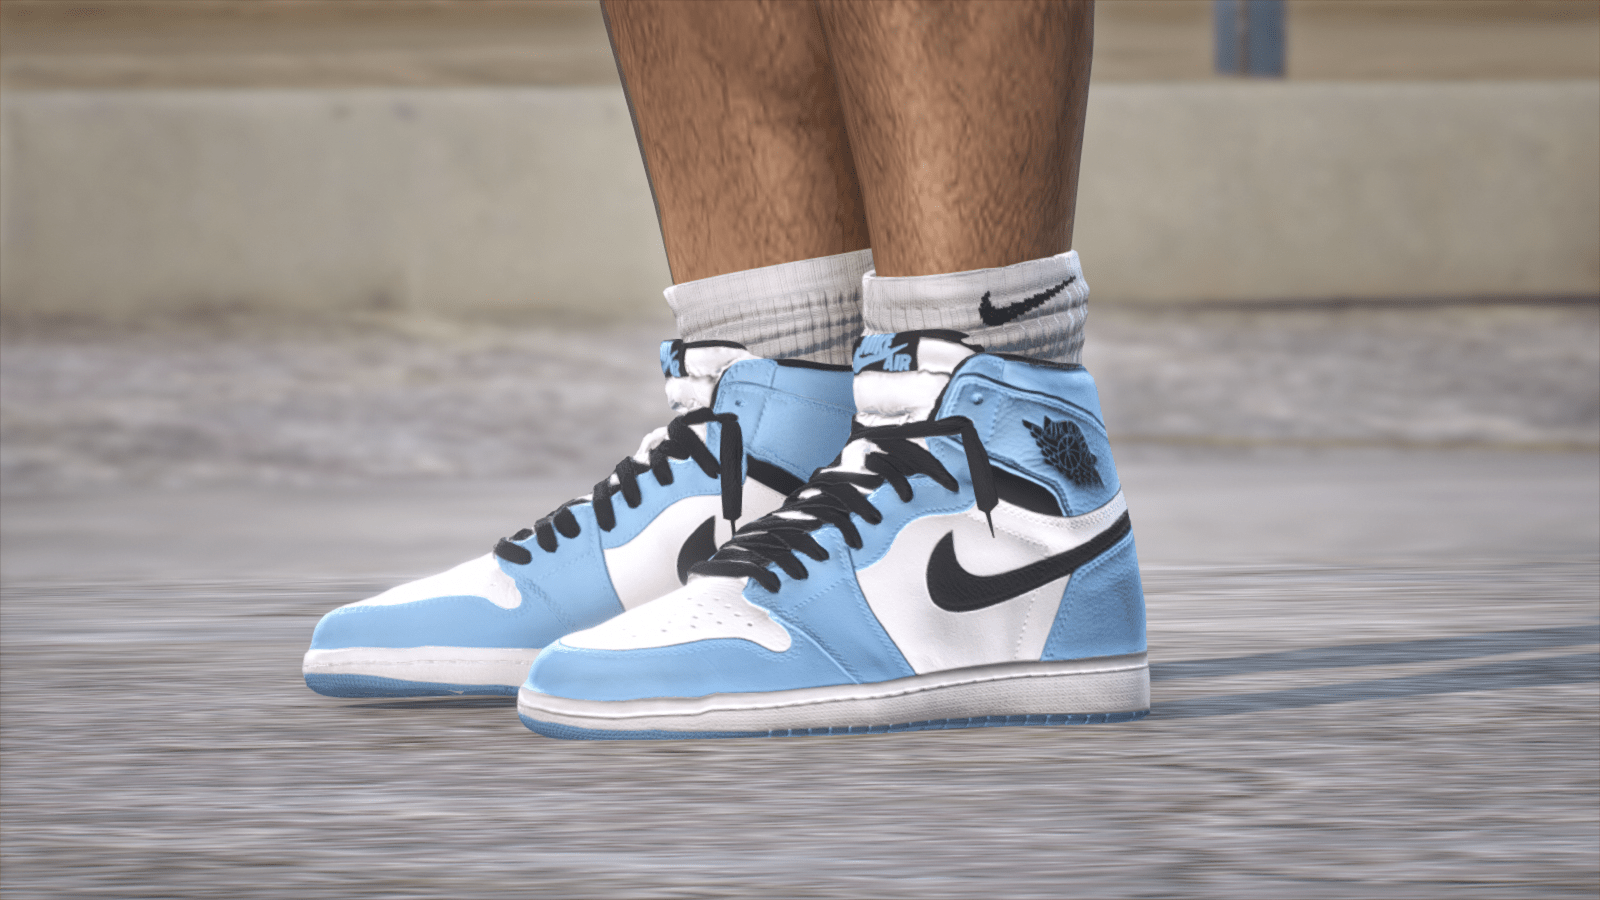 Nike Air Force 1 Low Off-White MCA University Blue for MP Male 